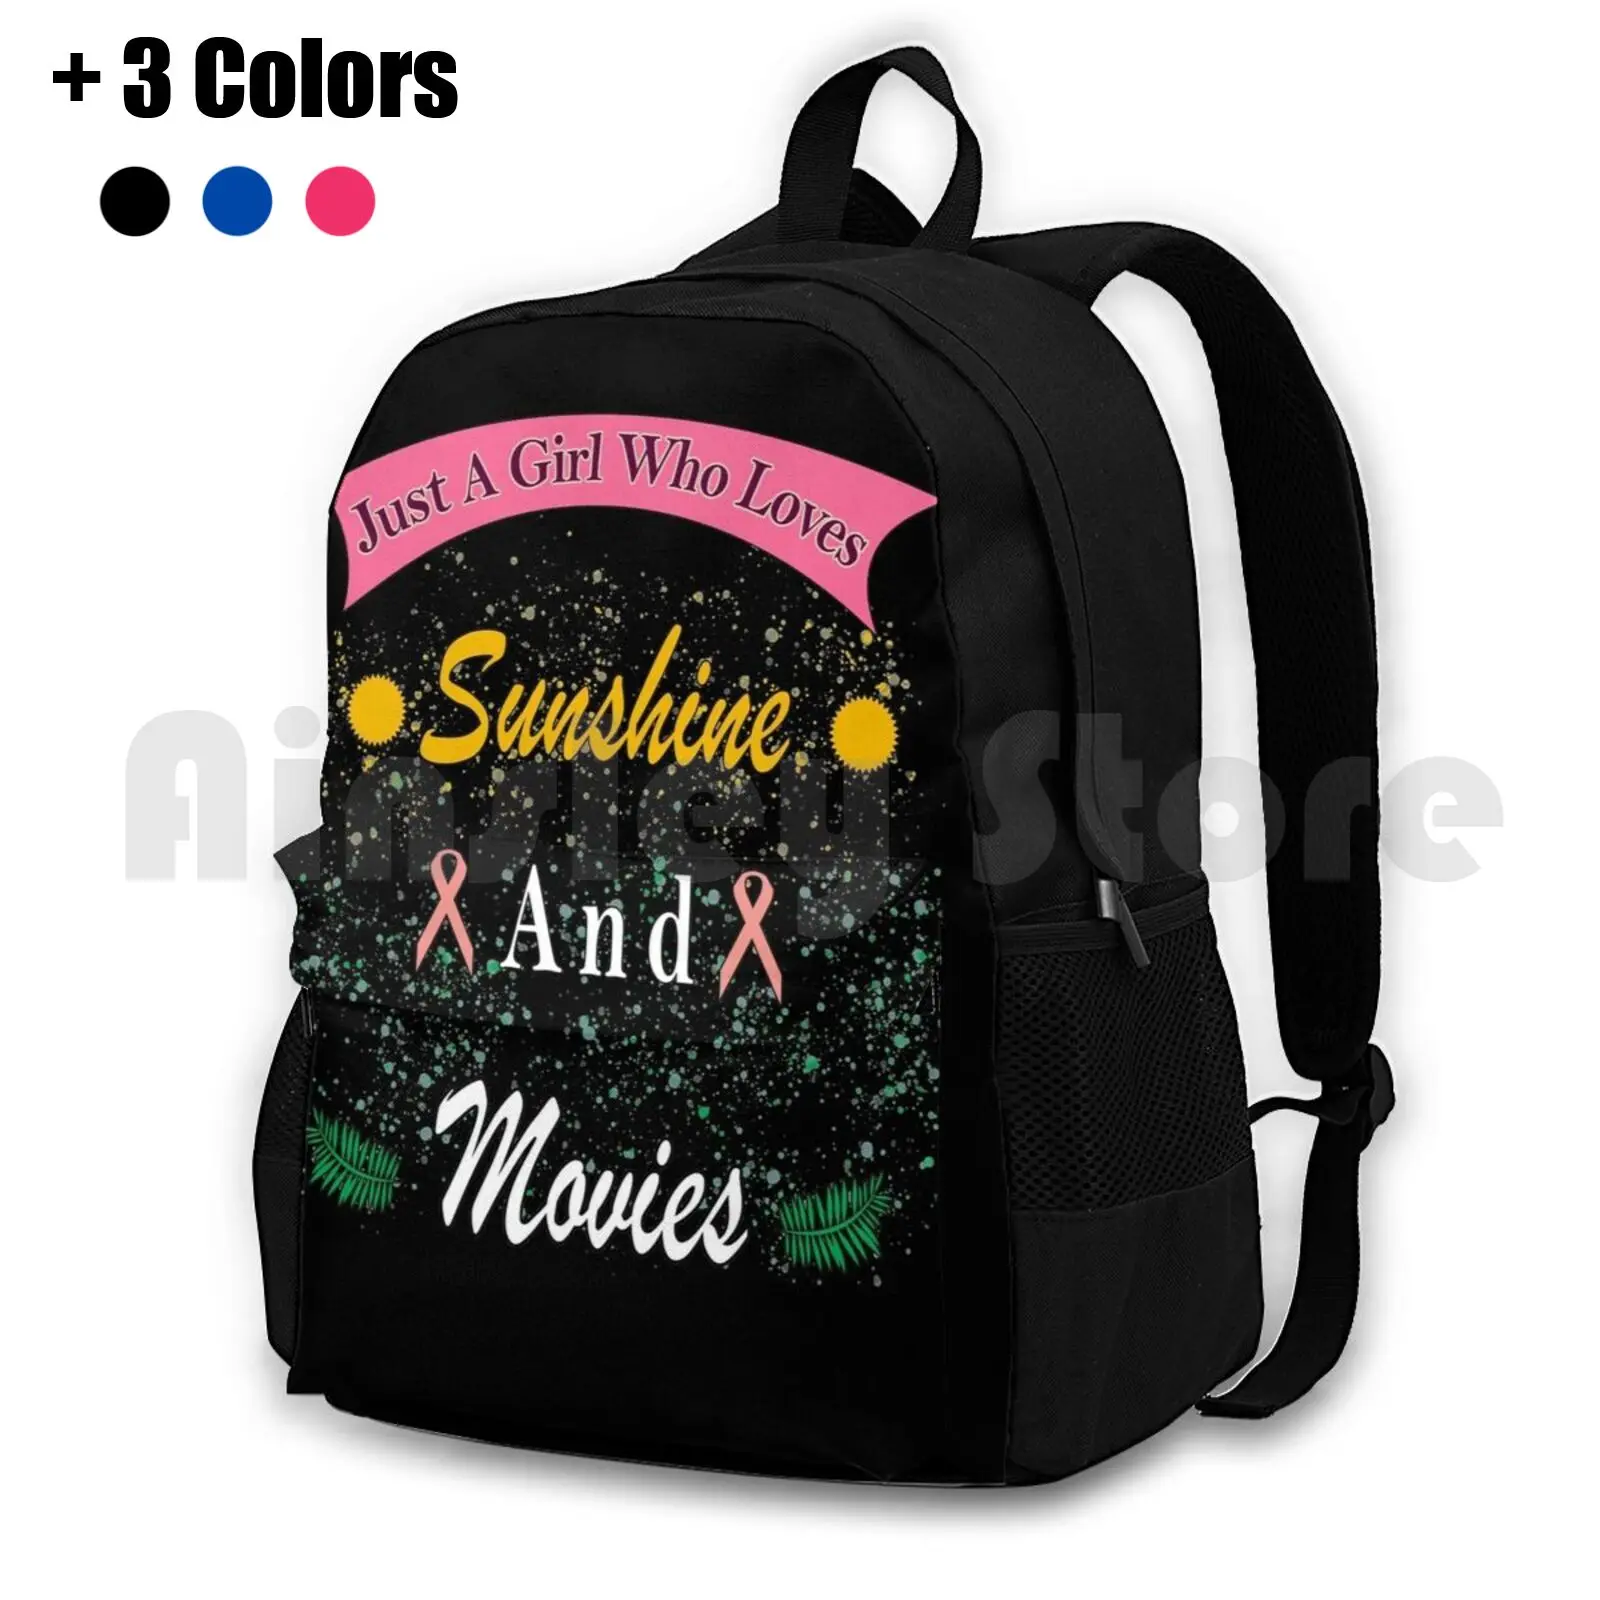 

Just A Girl Who Loves Sunshine And Movies Outdoor Hiking Backpack Riding Climbing Sports Bag Just A Girl Who Loves Sunshine And